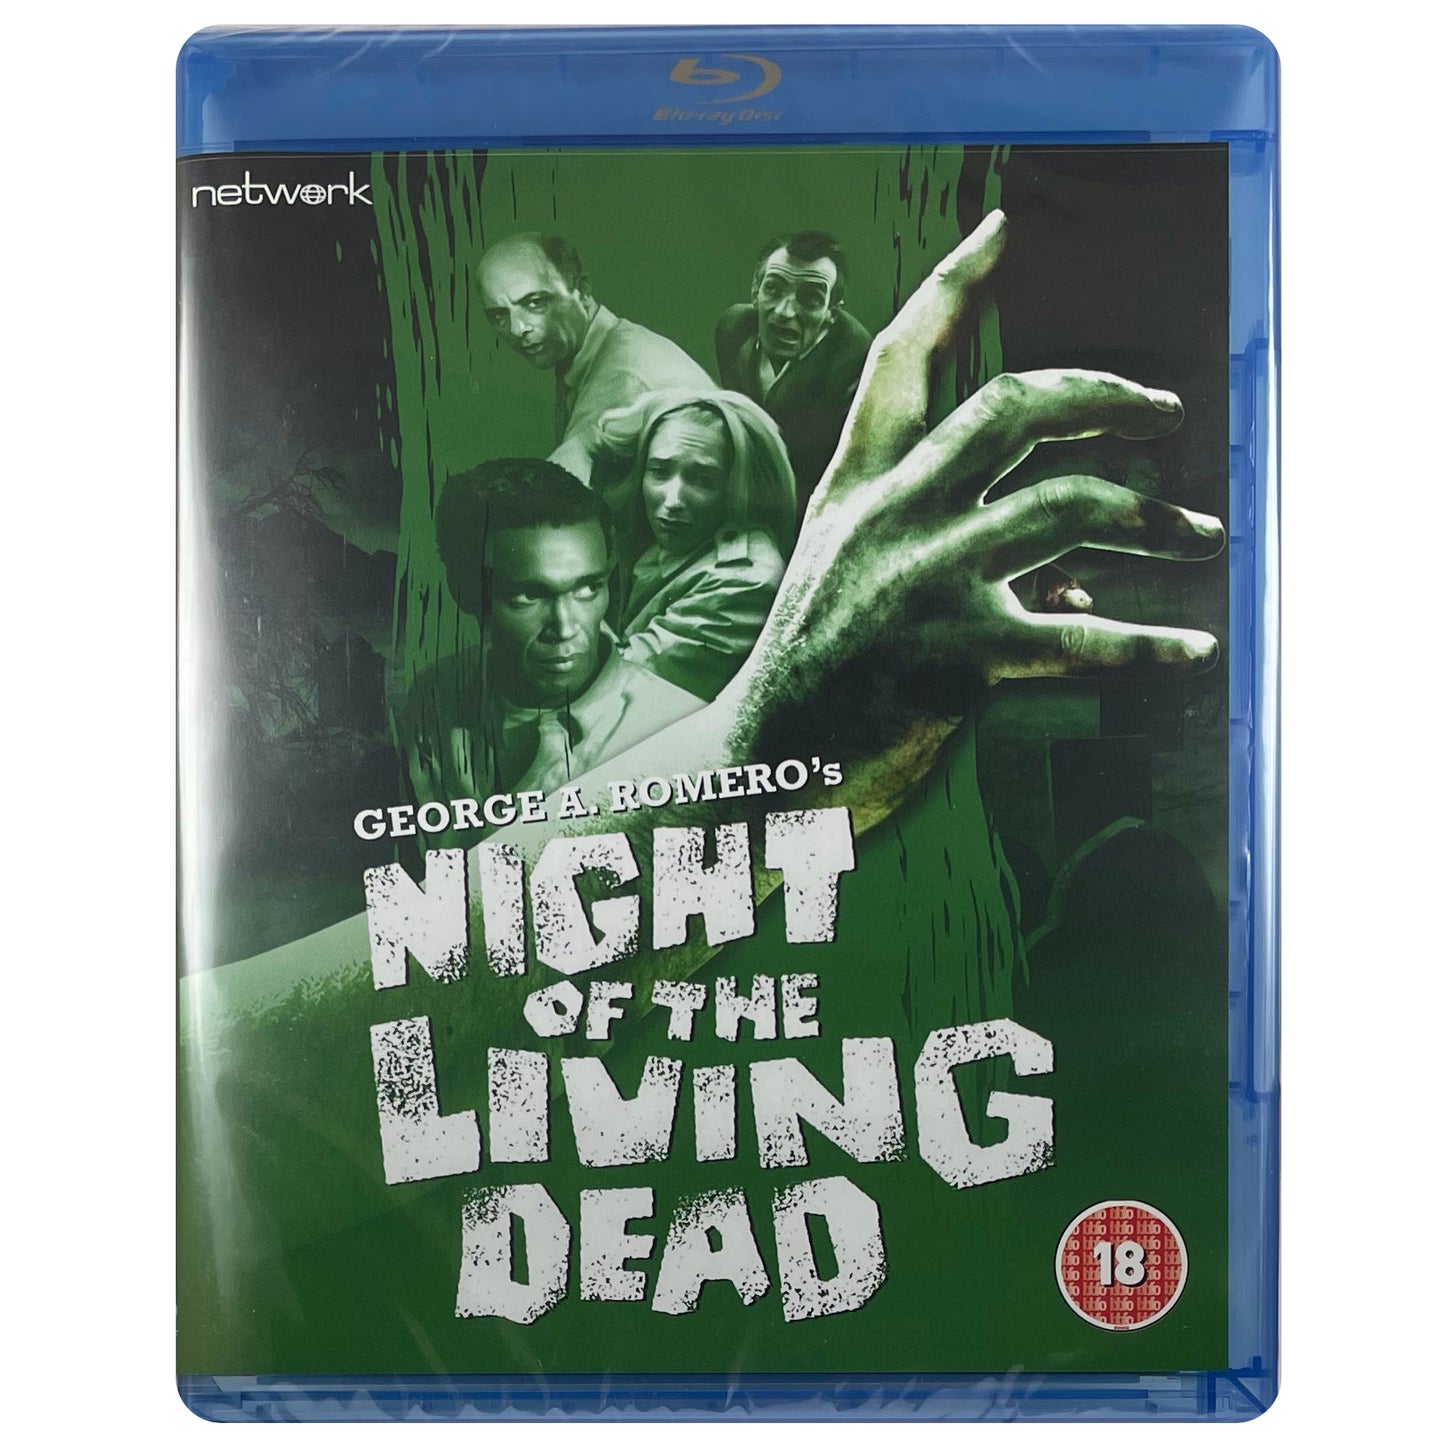 Night of the Living Dead Blu-Ray